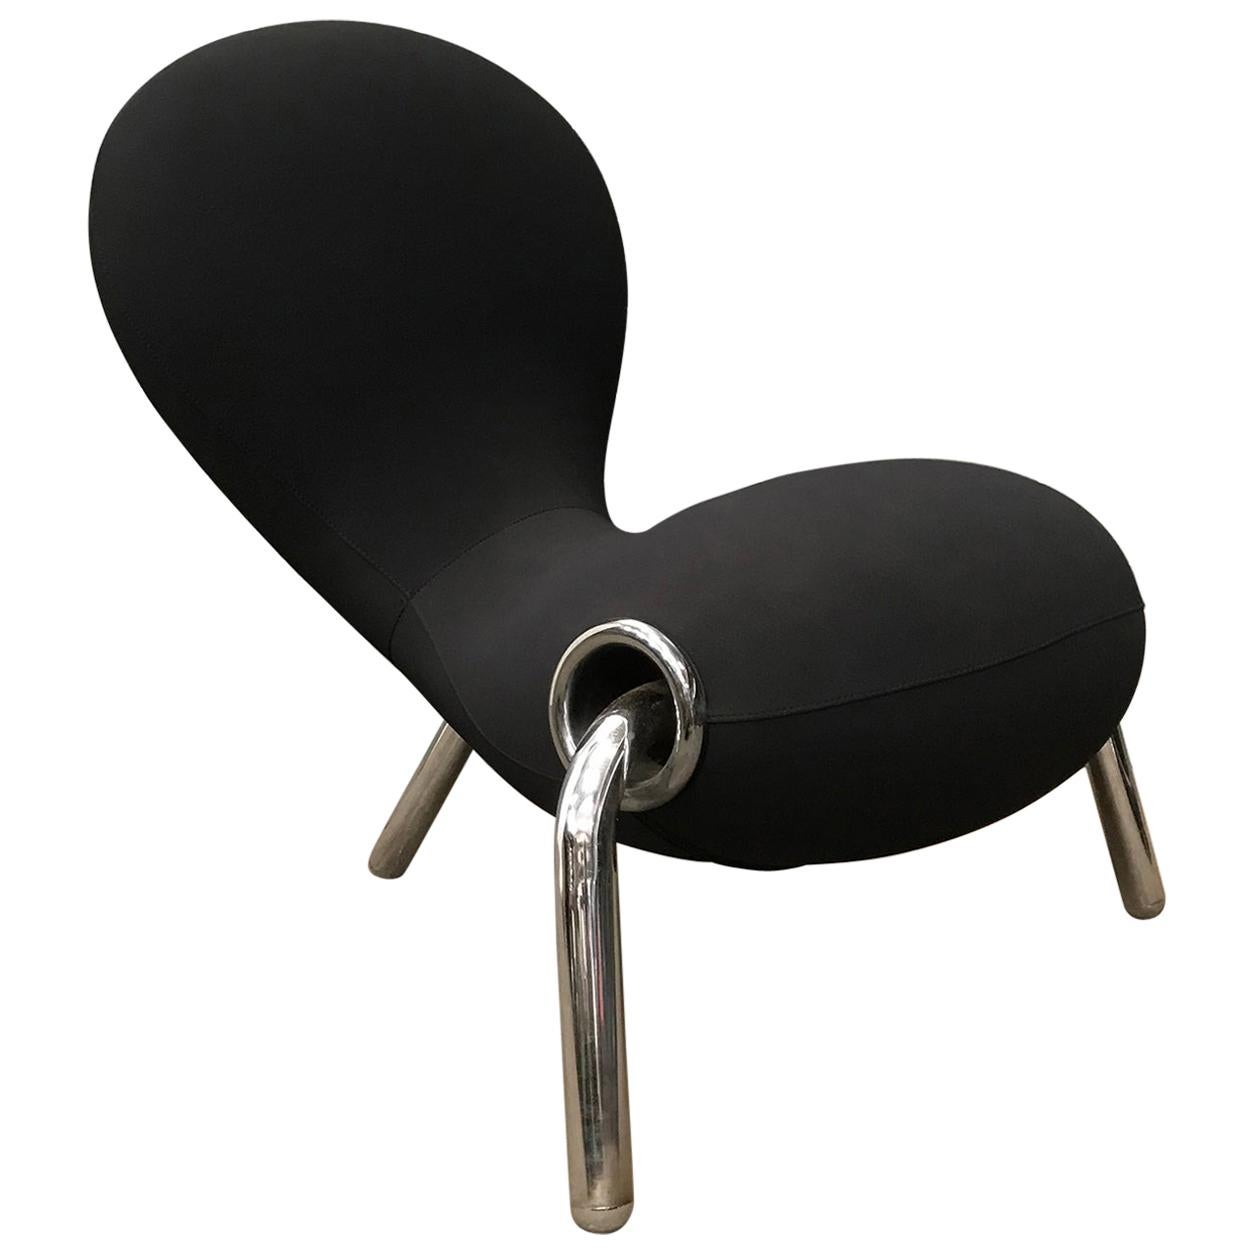 1988, Marc Newson, Black "Embryo" Lounge Chair for Cappellini